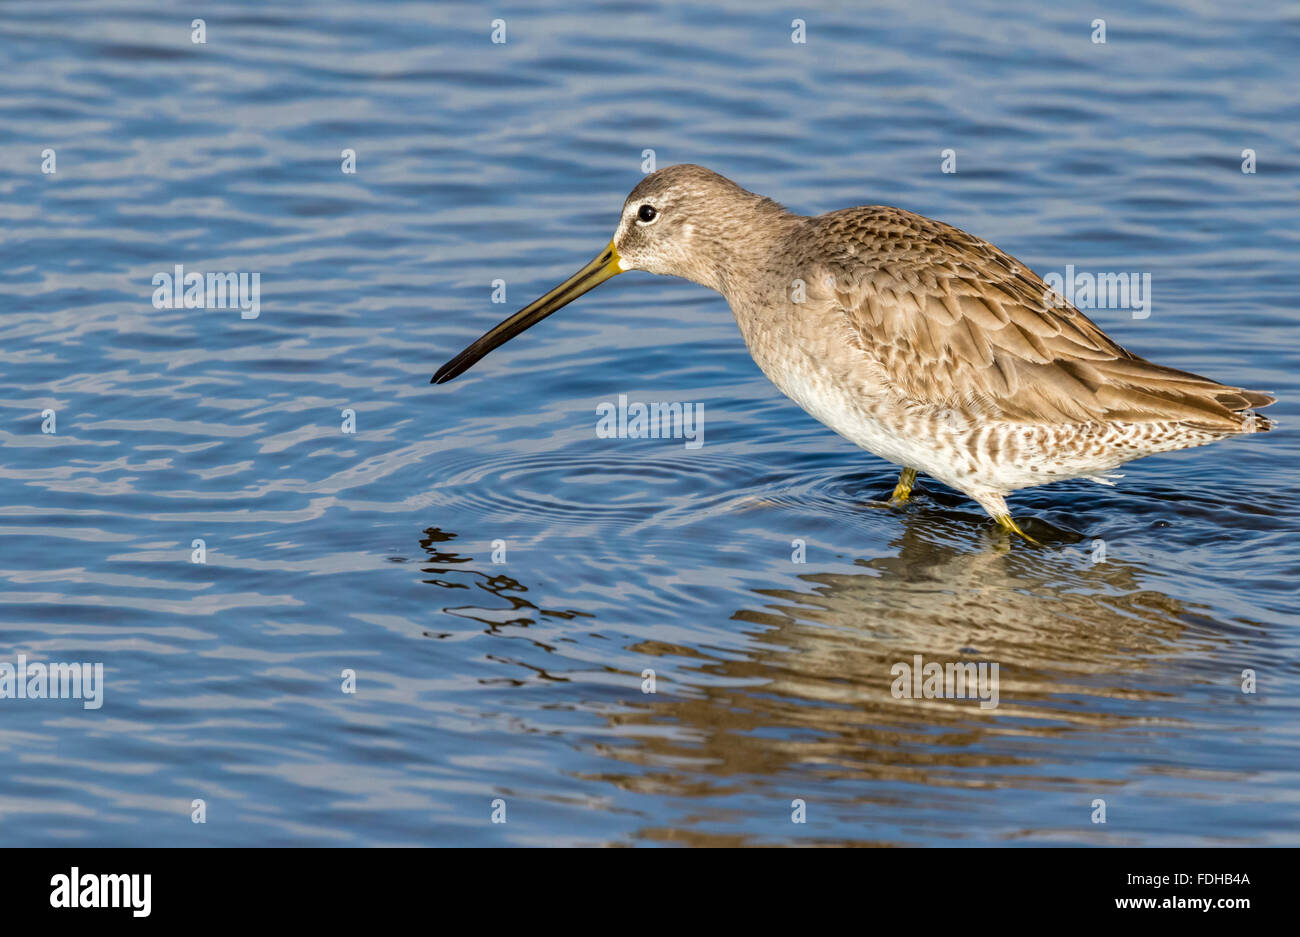 Long-billed dowitcher (Limnodromus scolopaceus) wading in the tidal marsh, Galveston, Texas, USA. Stock Photo